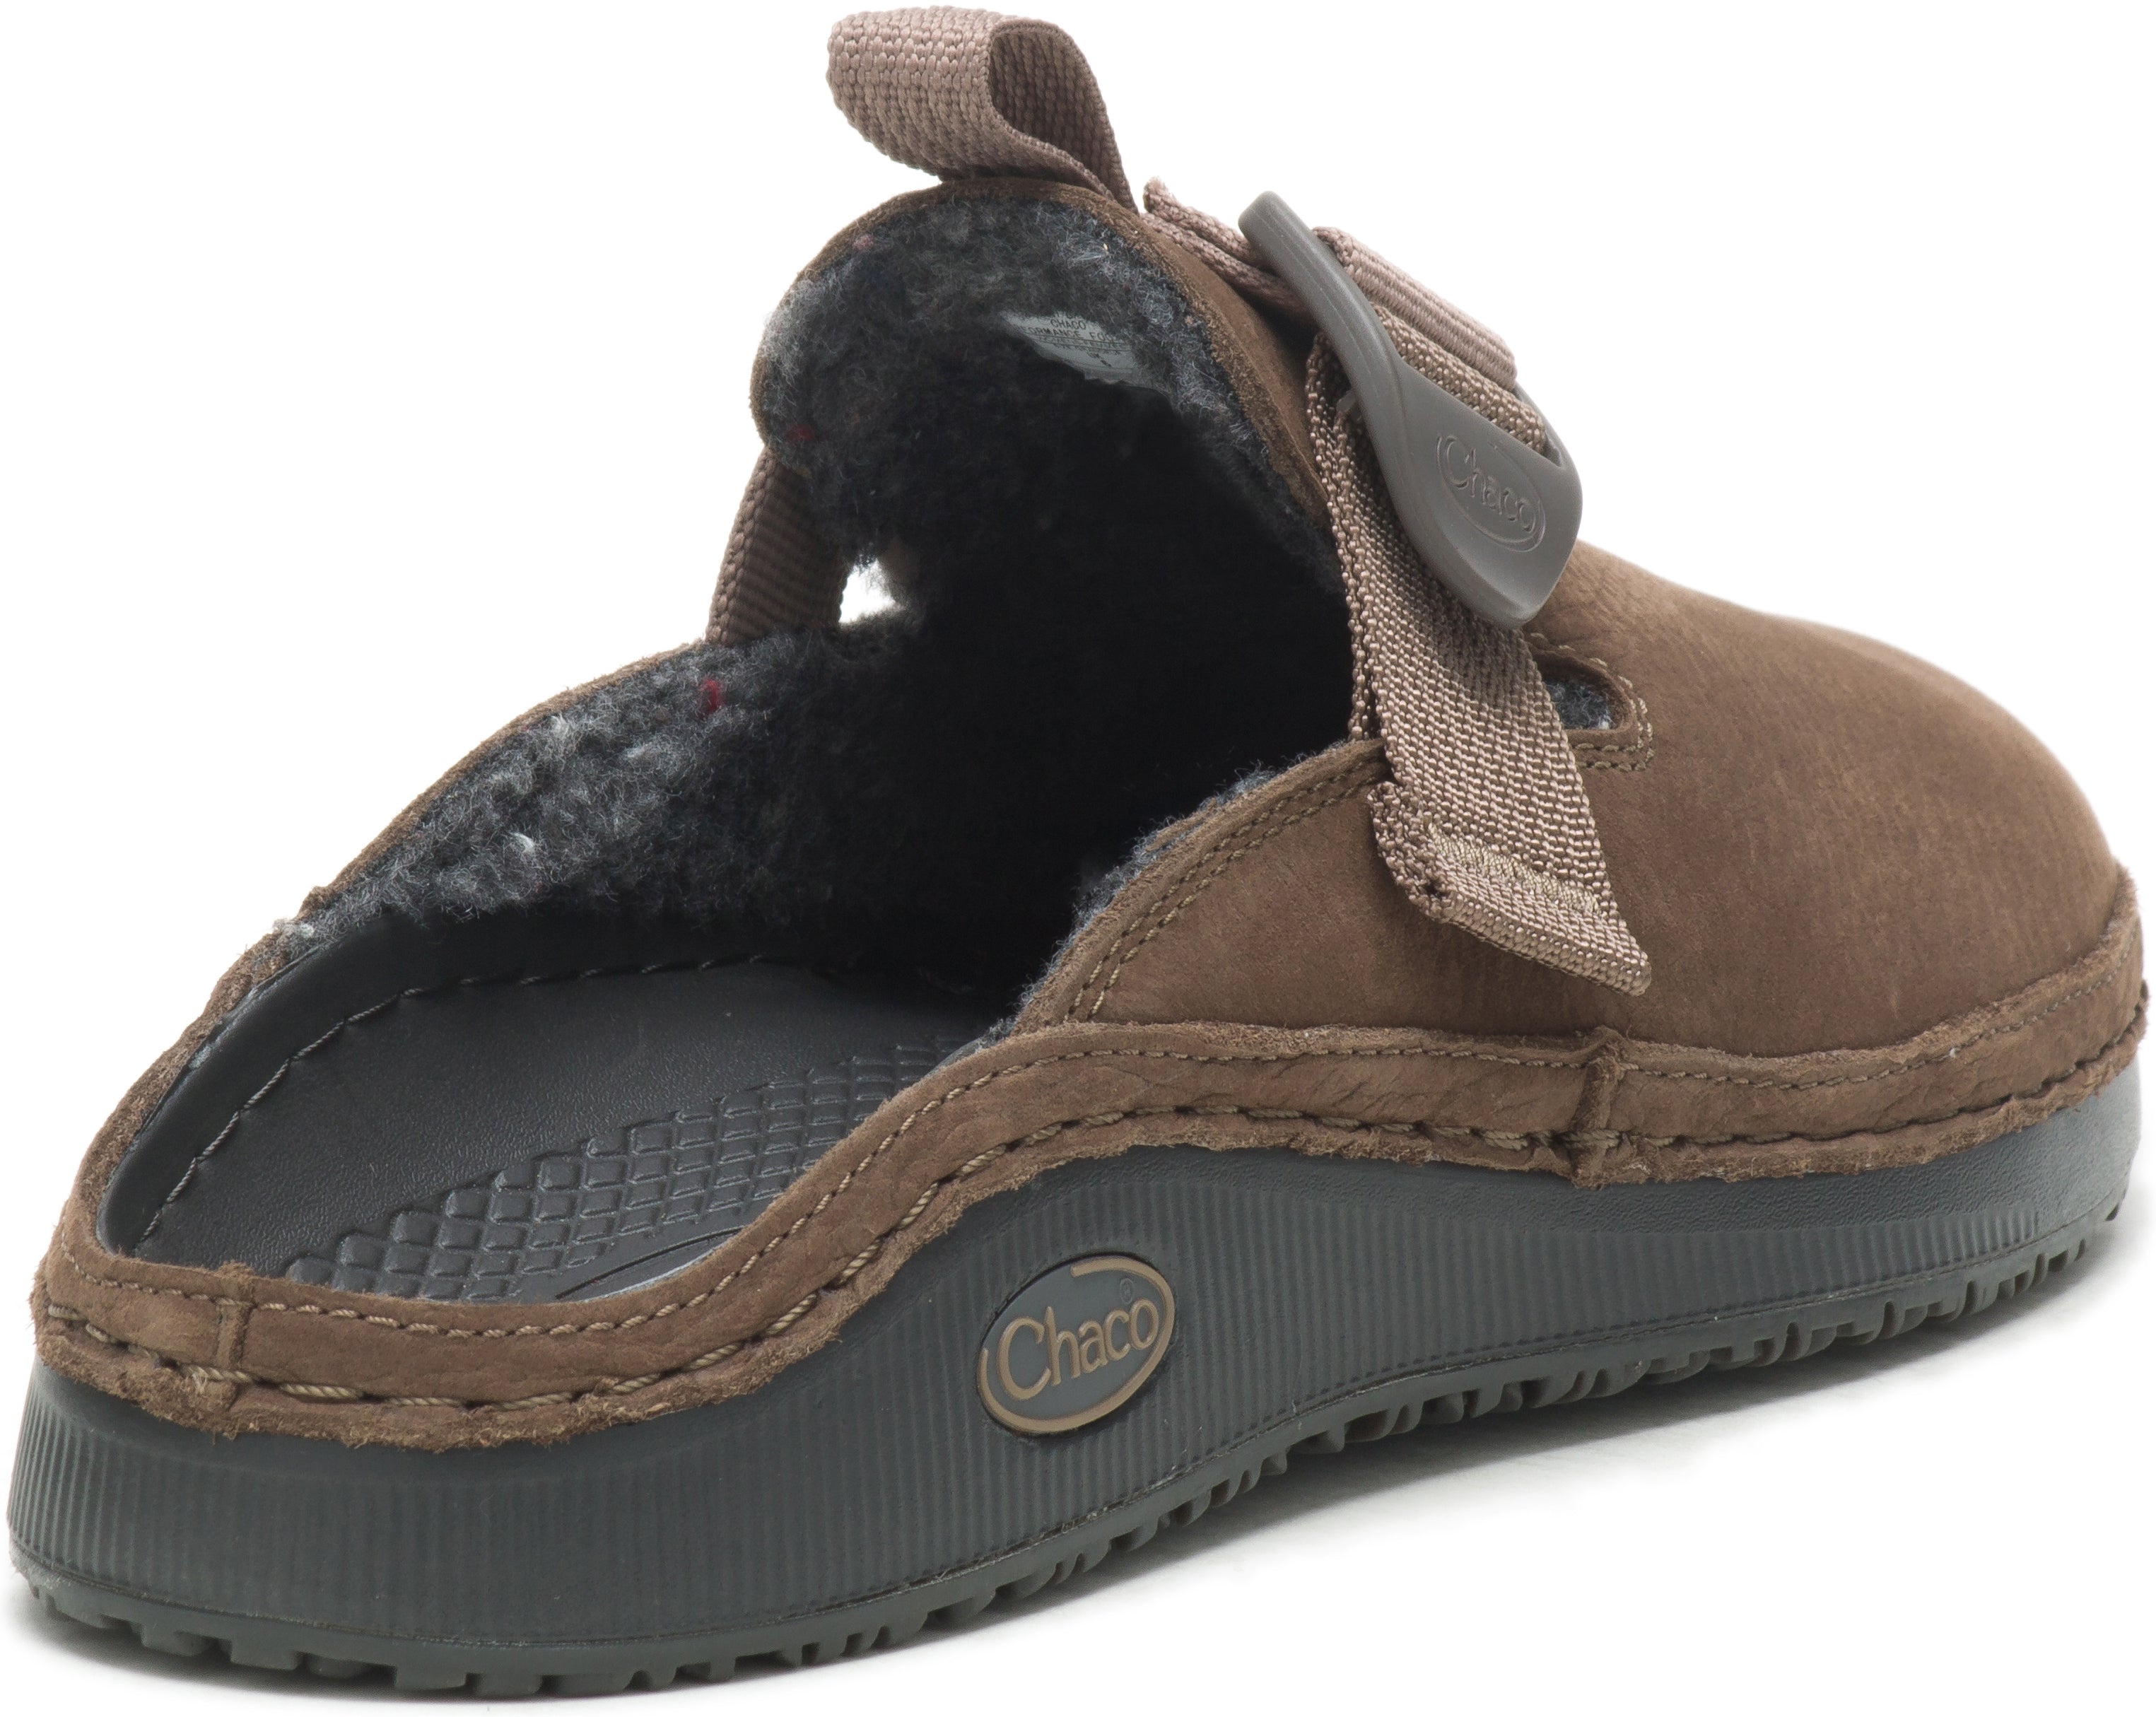 Chaco Women's Paonia Clog Fluff